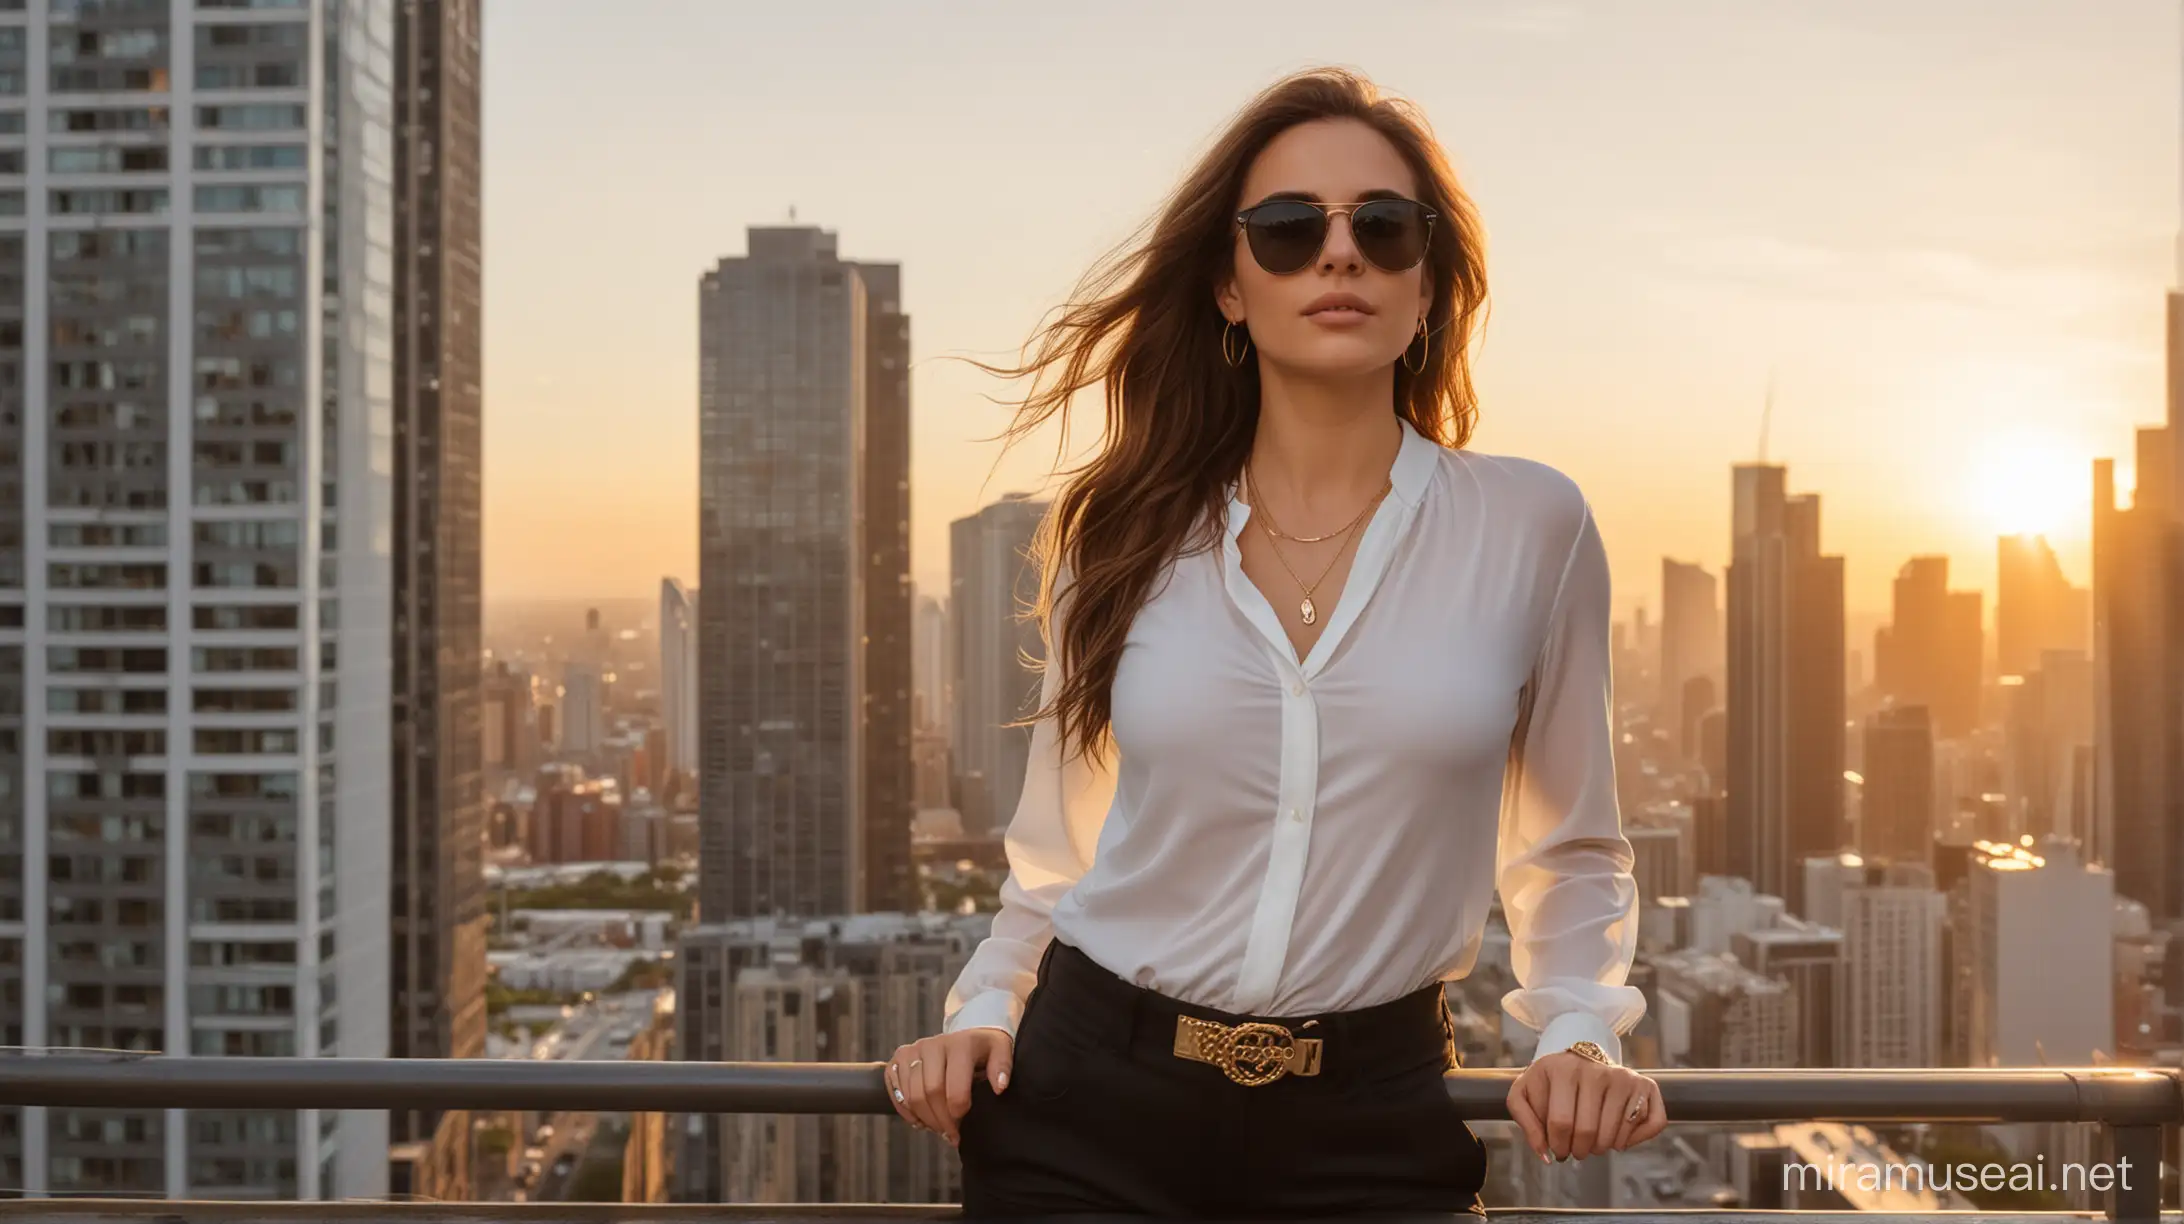 Brunette Woman in Chic Urban Sunset